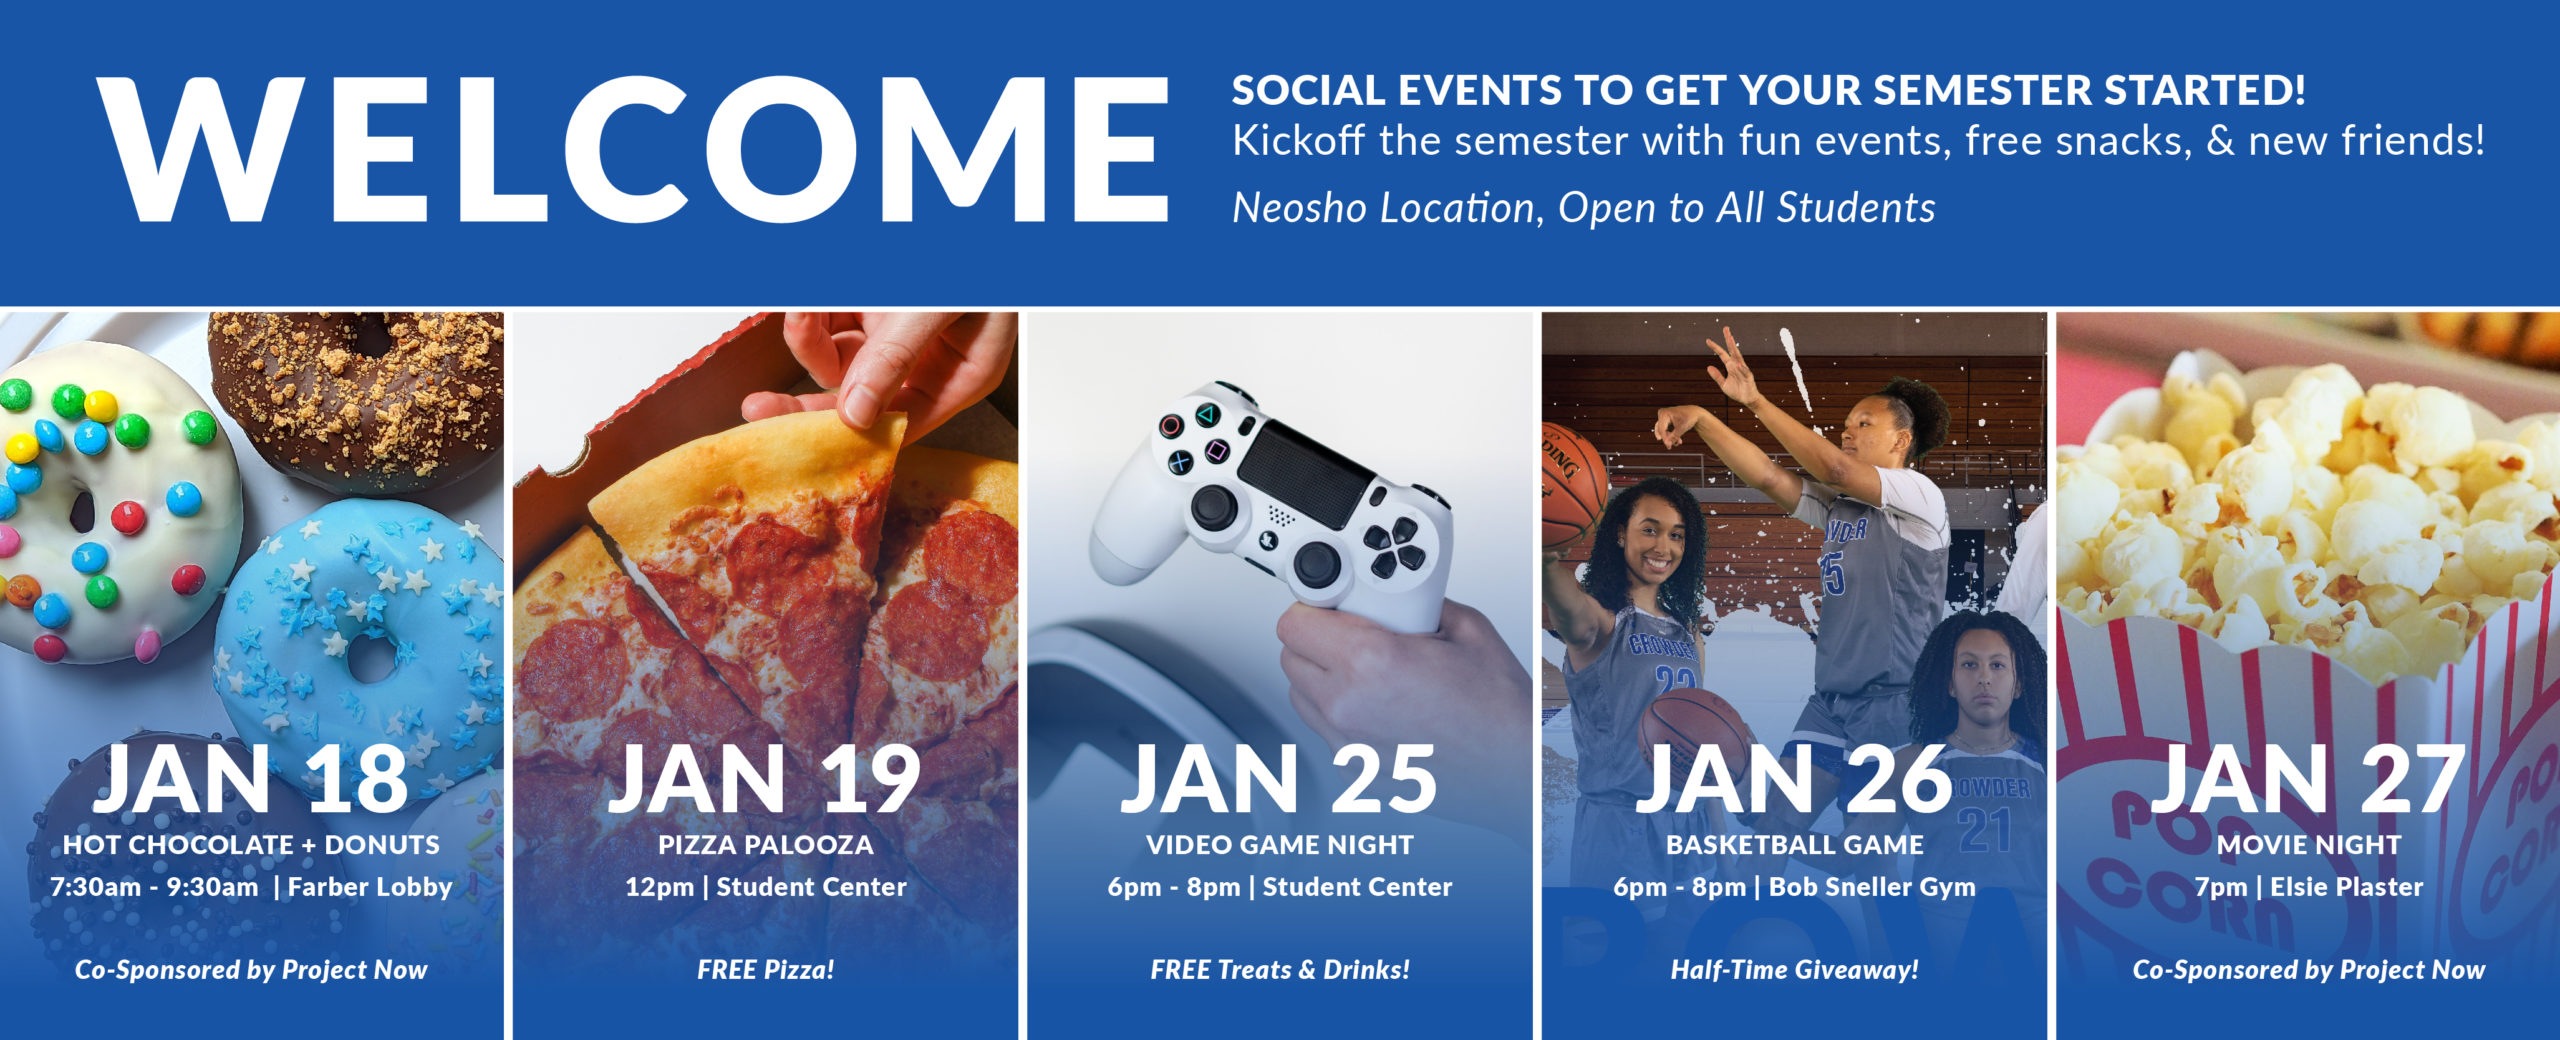 Social Events to Get Your Semester Started. Neosho Location, Open to All Students!